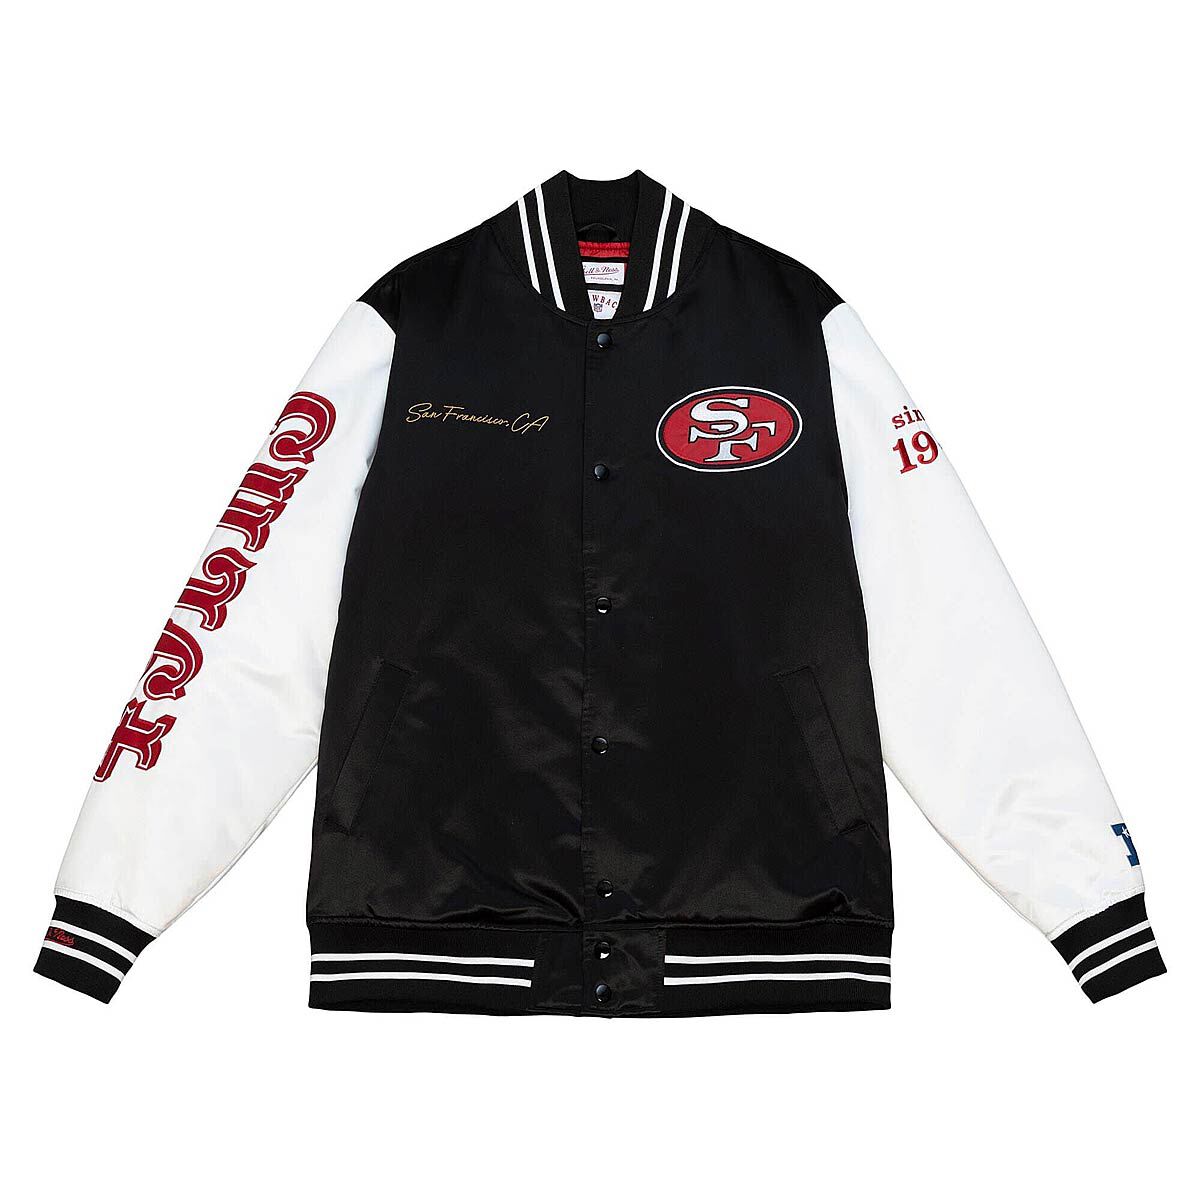 Jackets for you: order online and easy | KICKZ